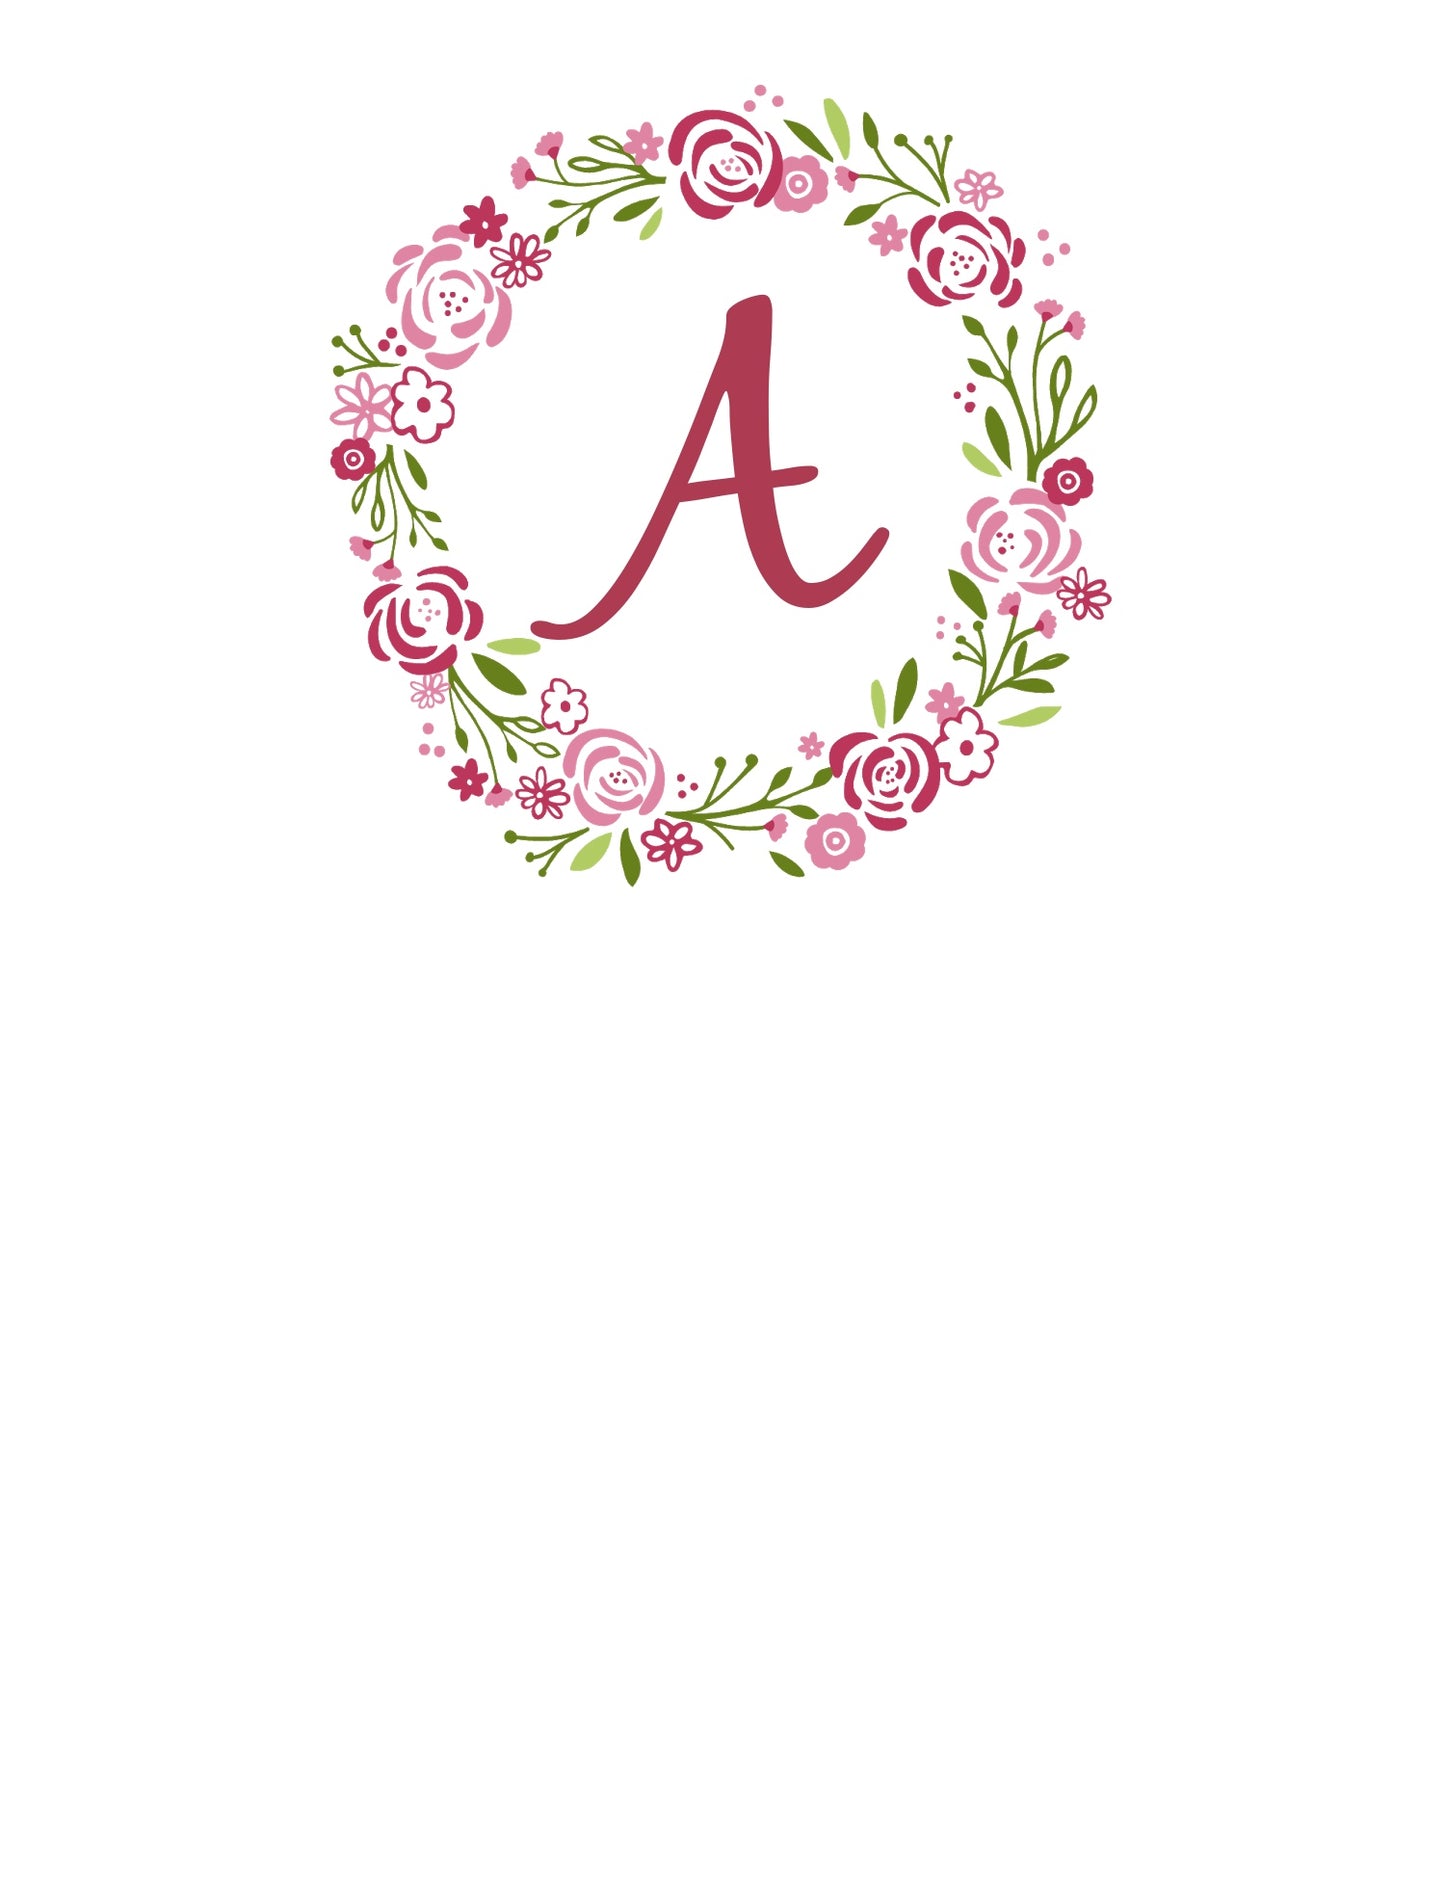 The letter A